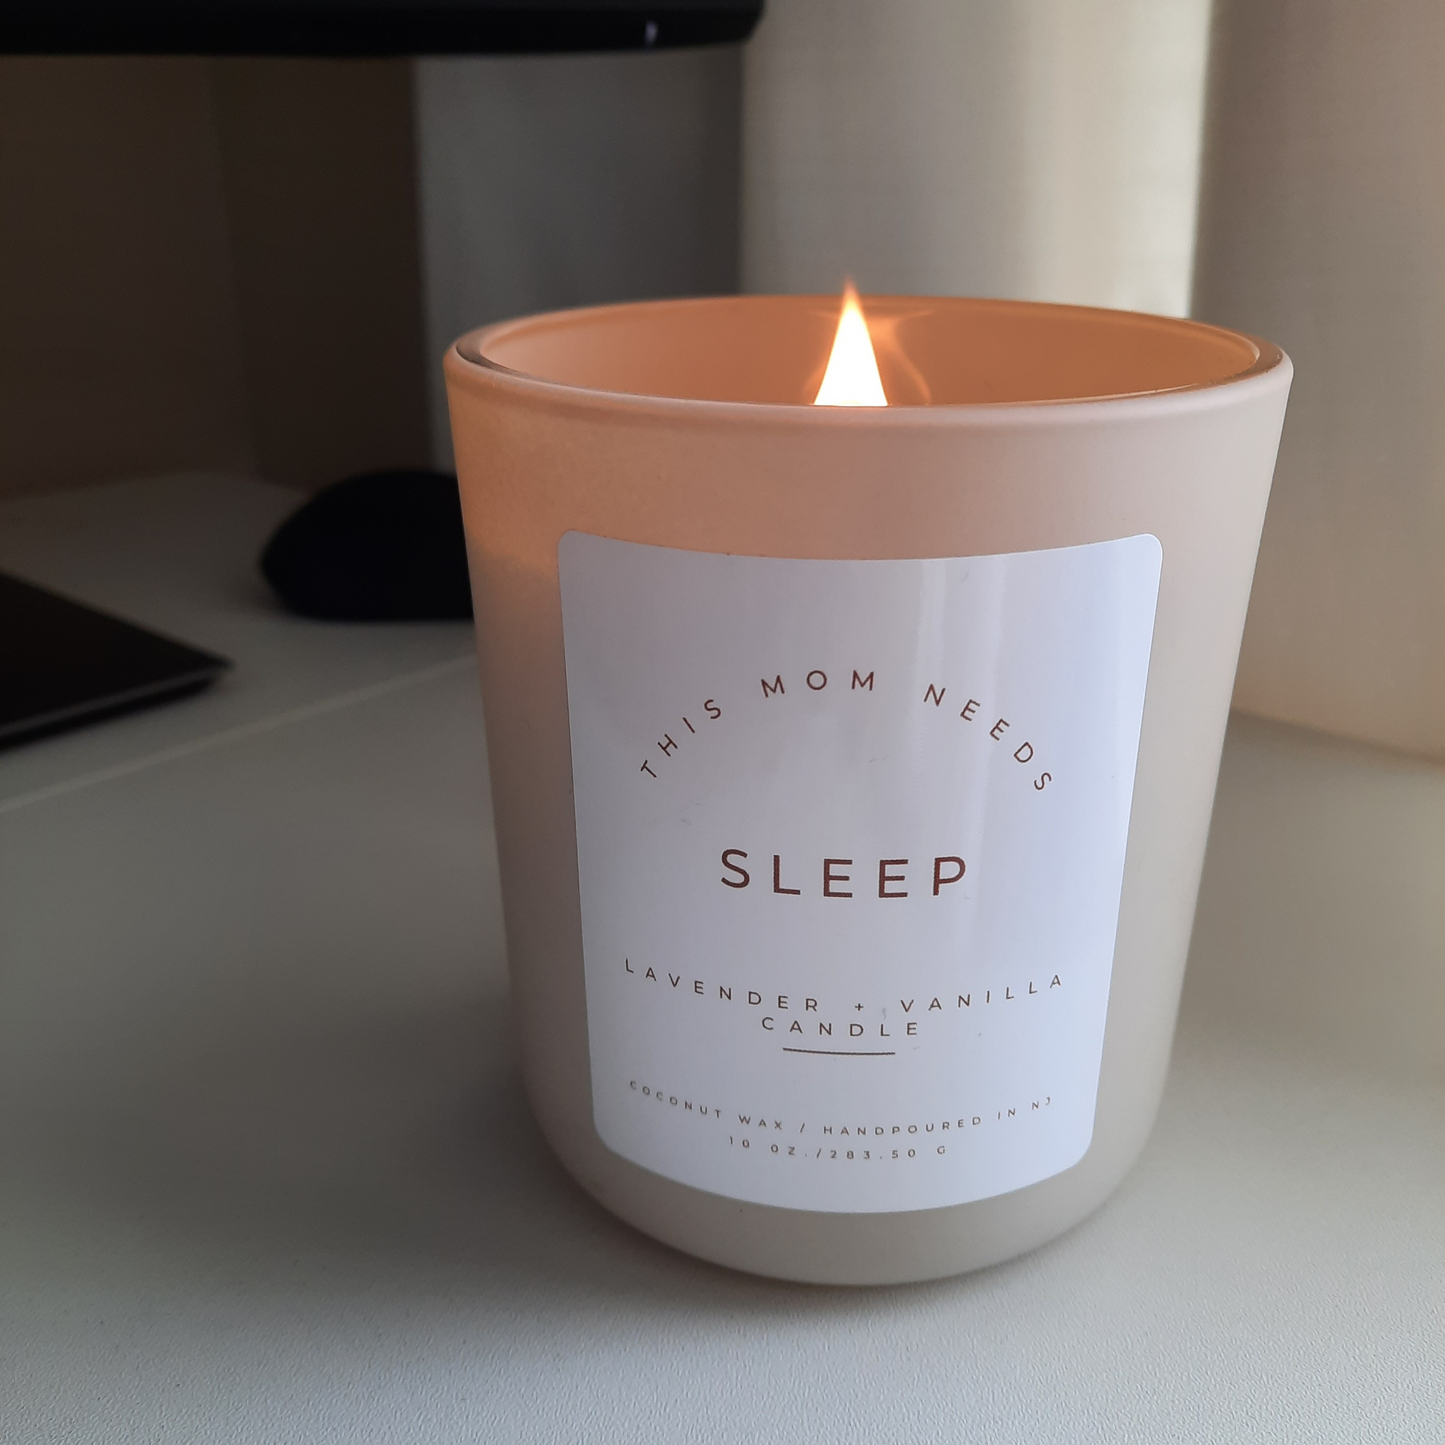 This Mom Needs Sleep: Lavender & Vanilla Candle - Tranquility in a Beige Dream